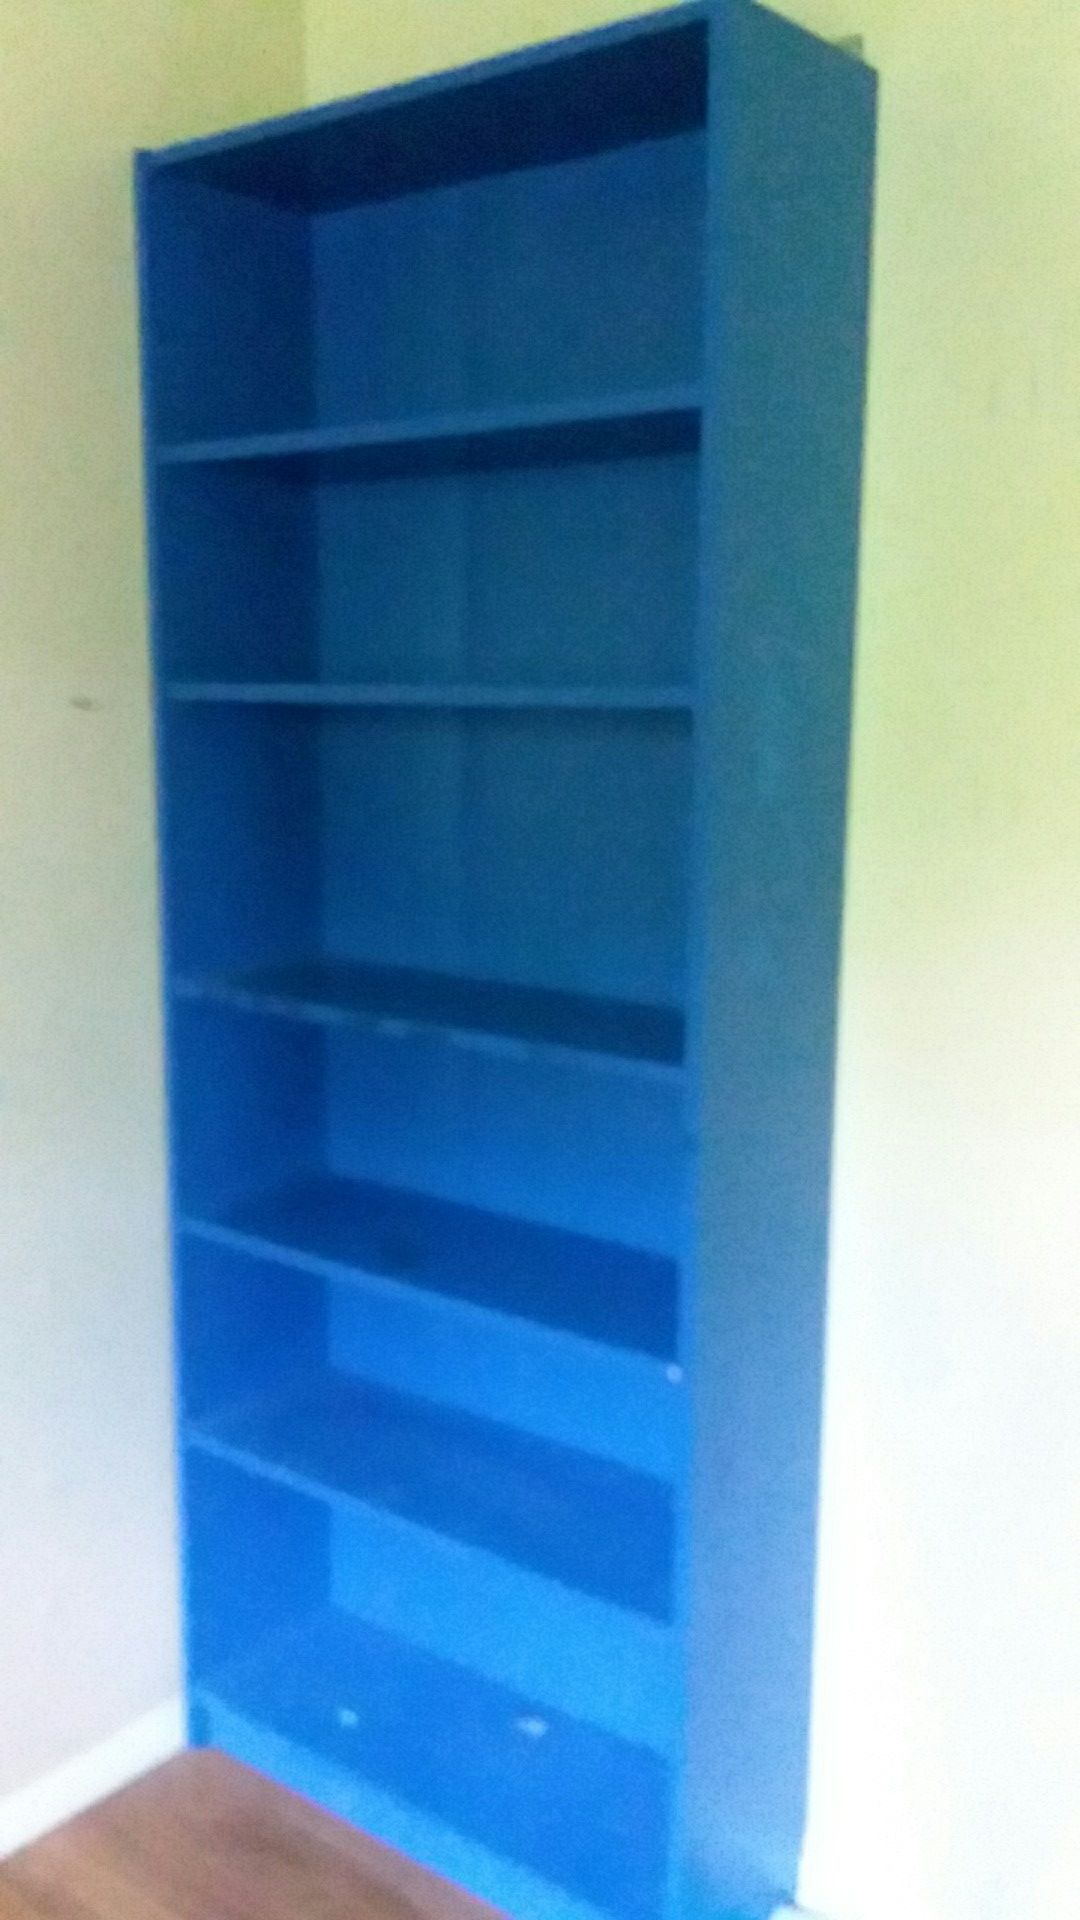 Bookshelves red and blue